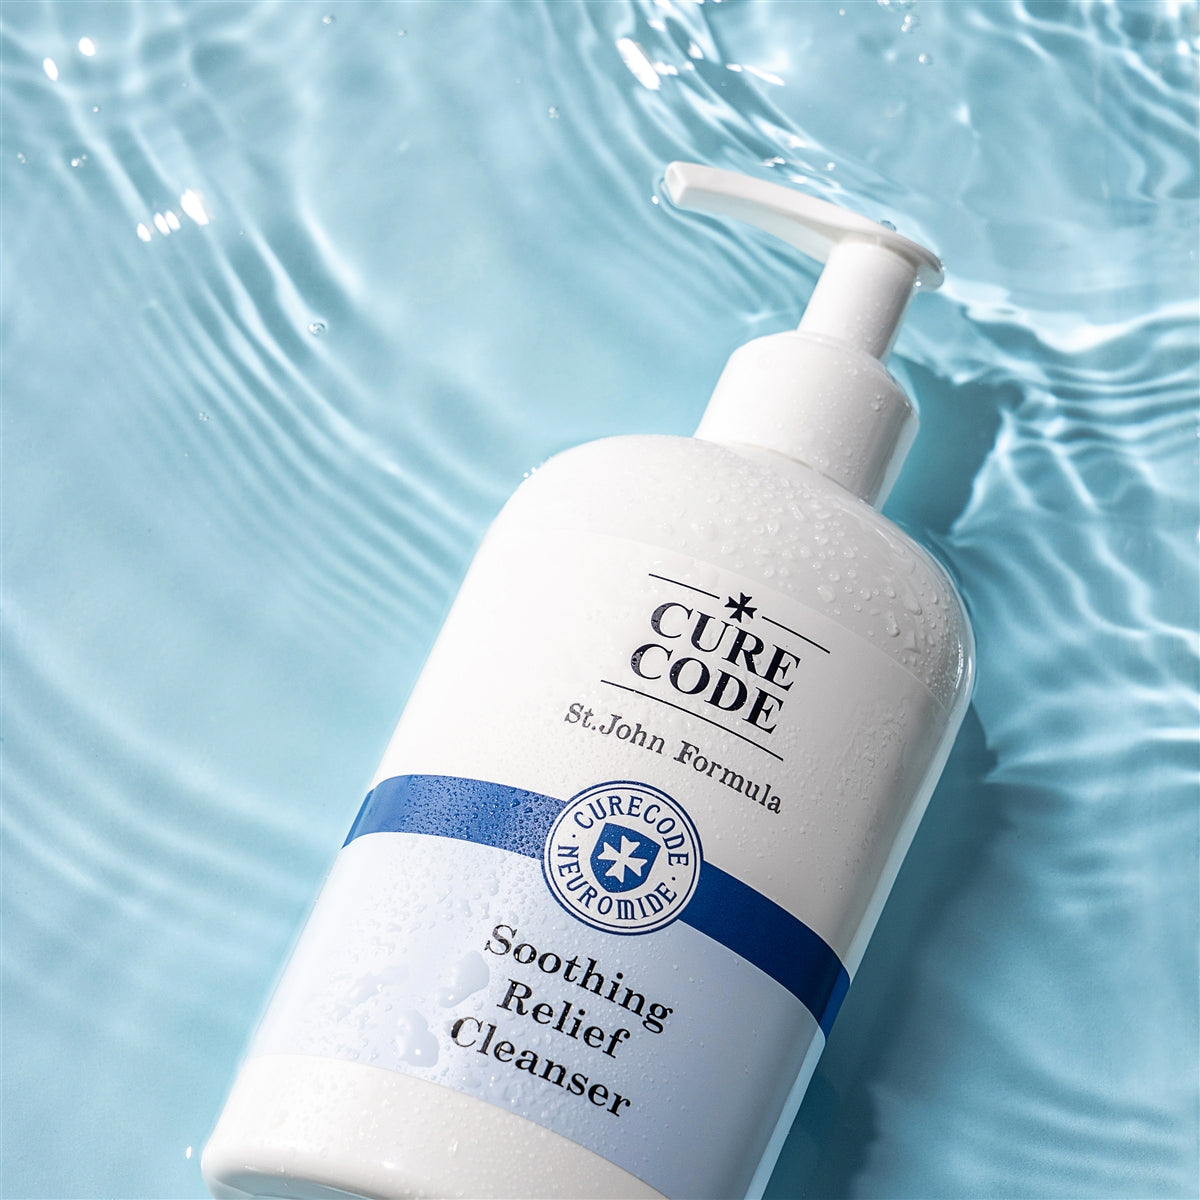 CureCode Soothing Relief Cleanser